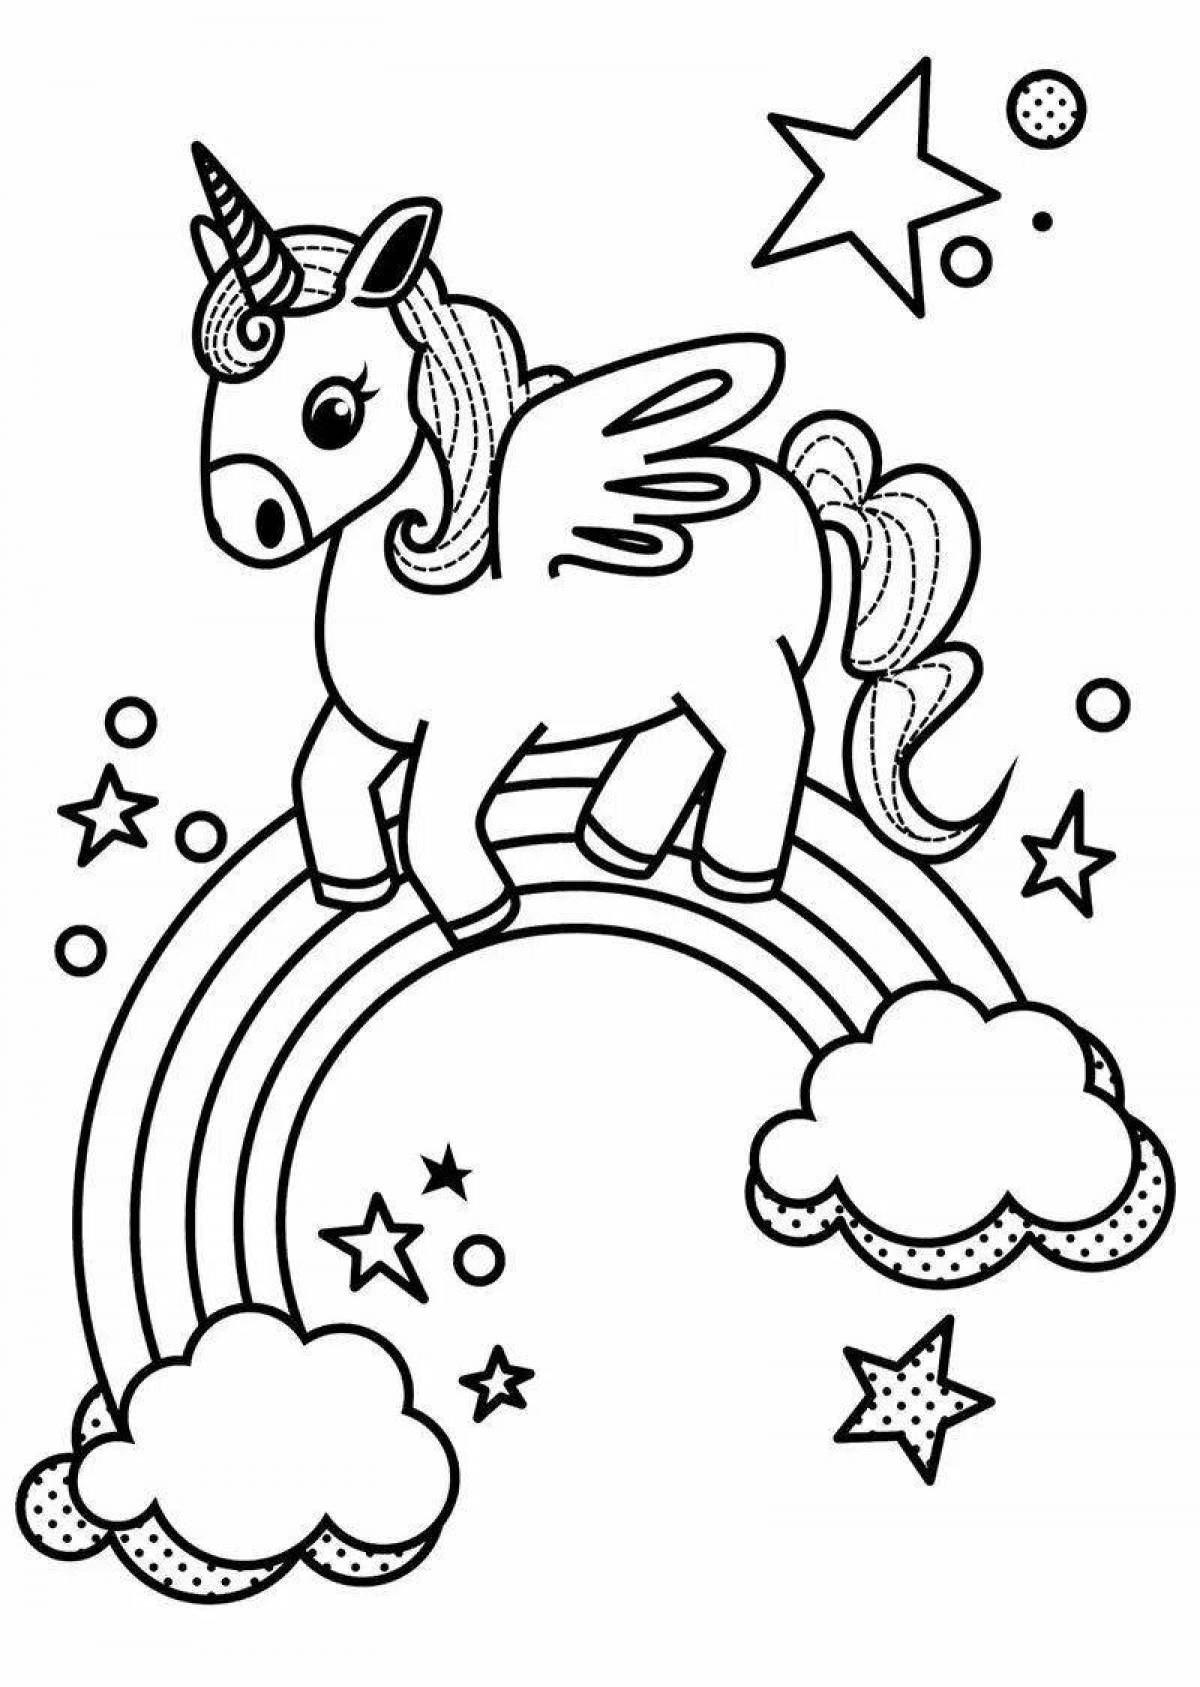 Mystical unicorn coloring book for kids 4 5